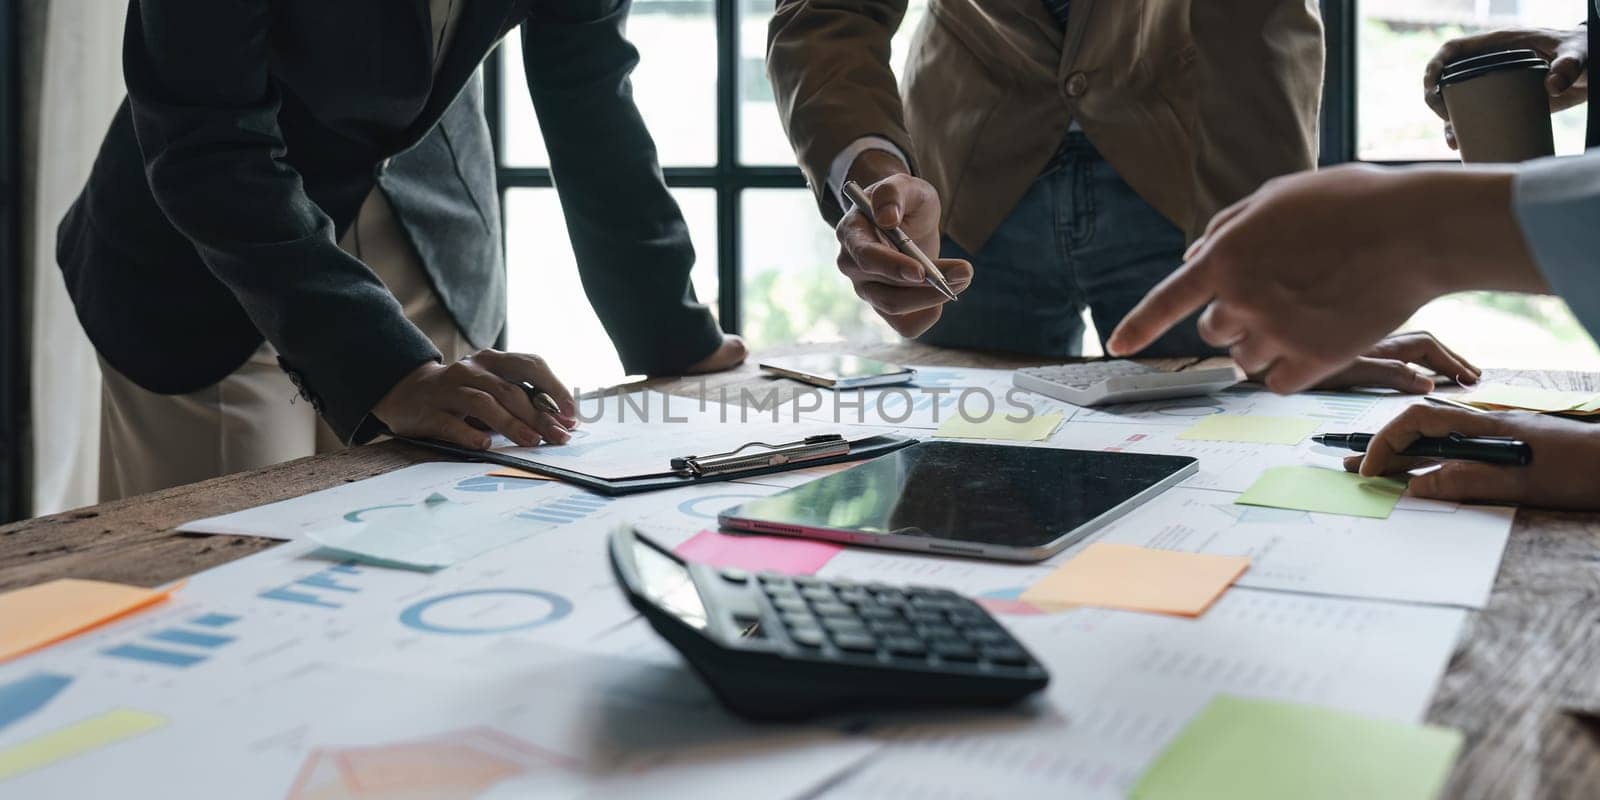 Business People Meeting using laptop computer, calculator, stock market chart paper for analysis planning to improve quality next month. Conference Discussion Corporate Concept.